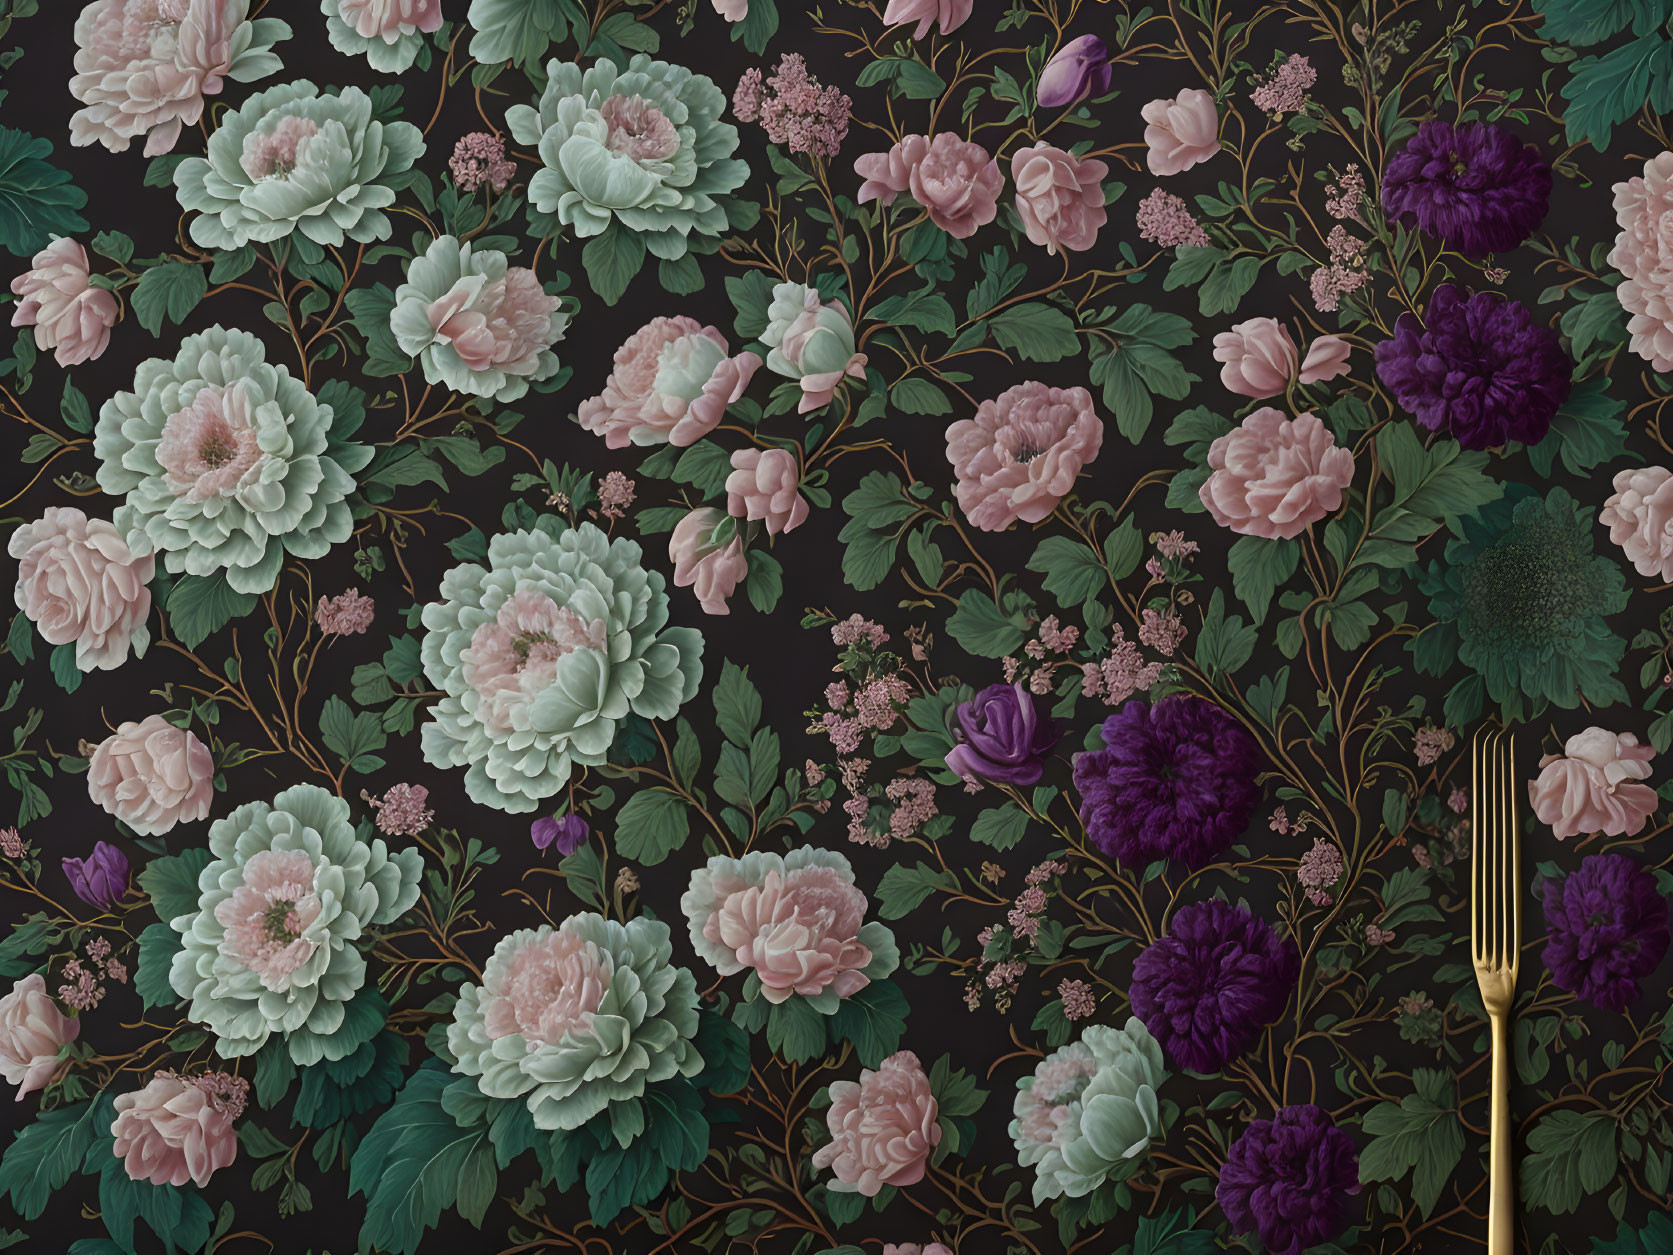 Dark Floral Wallpaper with Pink and Purple Flowers, Green Foliage, and Golden Fork